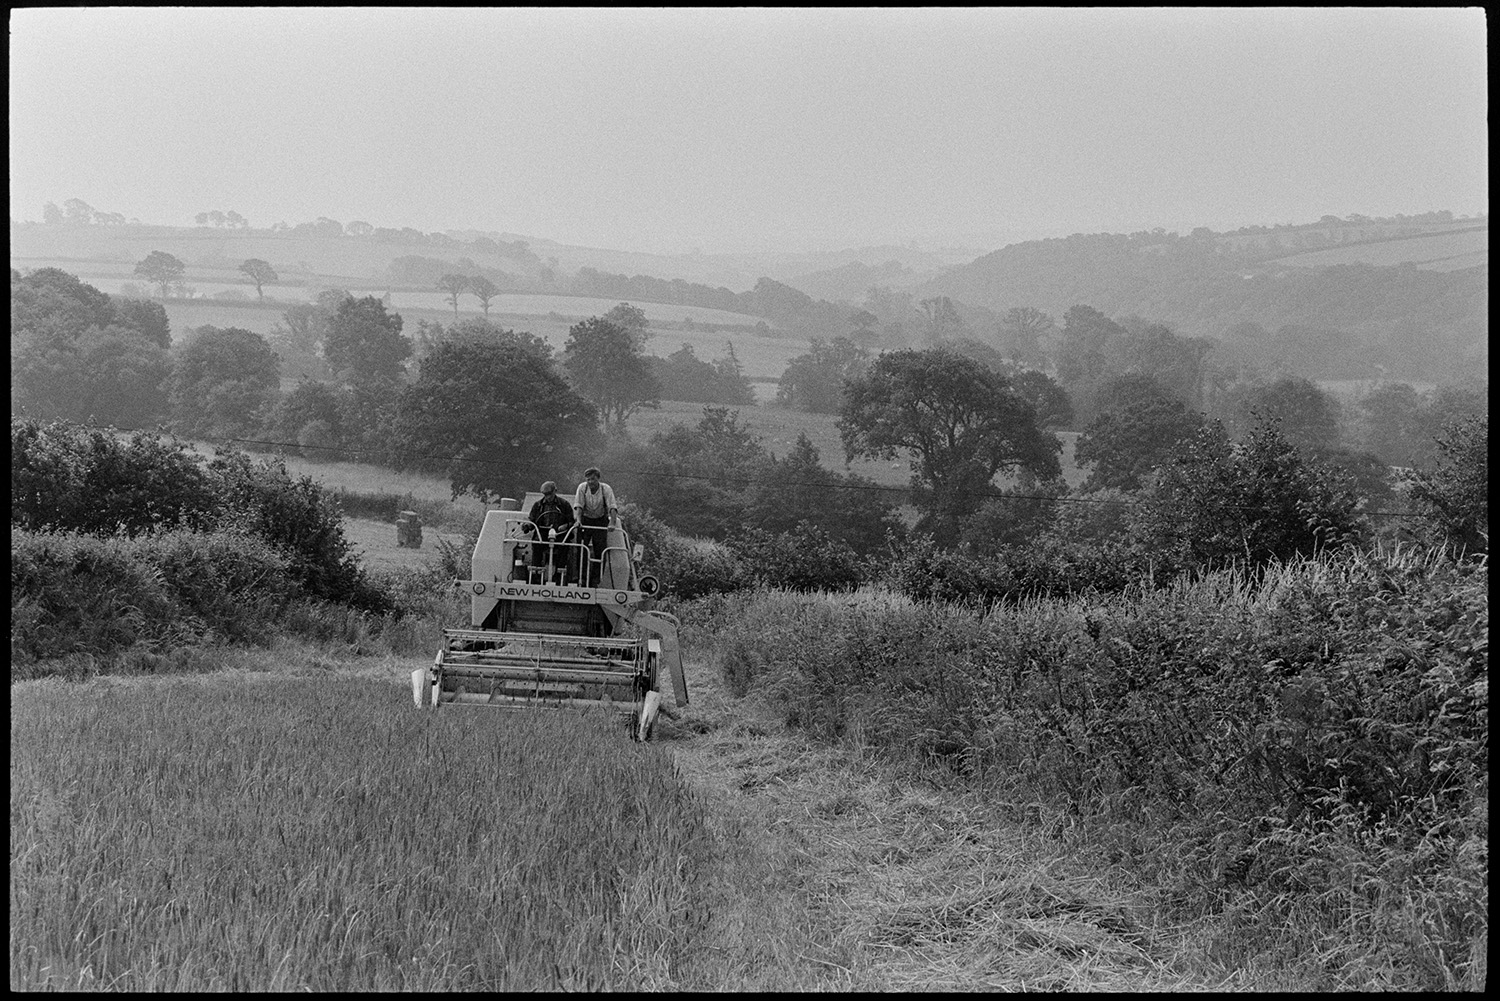 Combine harvester working in landscape. 
[Two men driving a combine harvester in a field at Brightley, Dolton, to harvest a crop. A landscape of trees and fields can be seen in the background.]